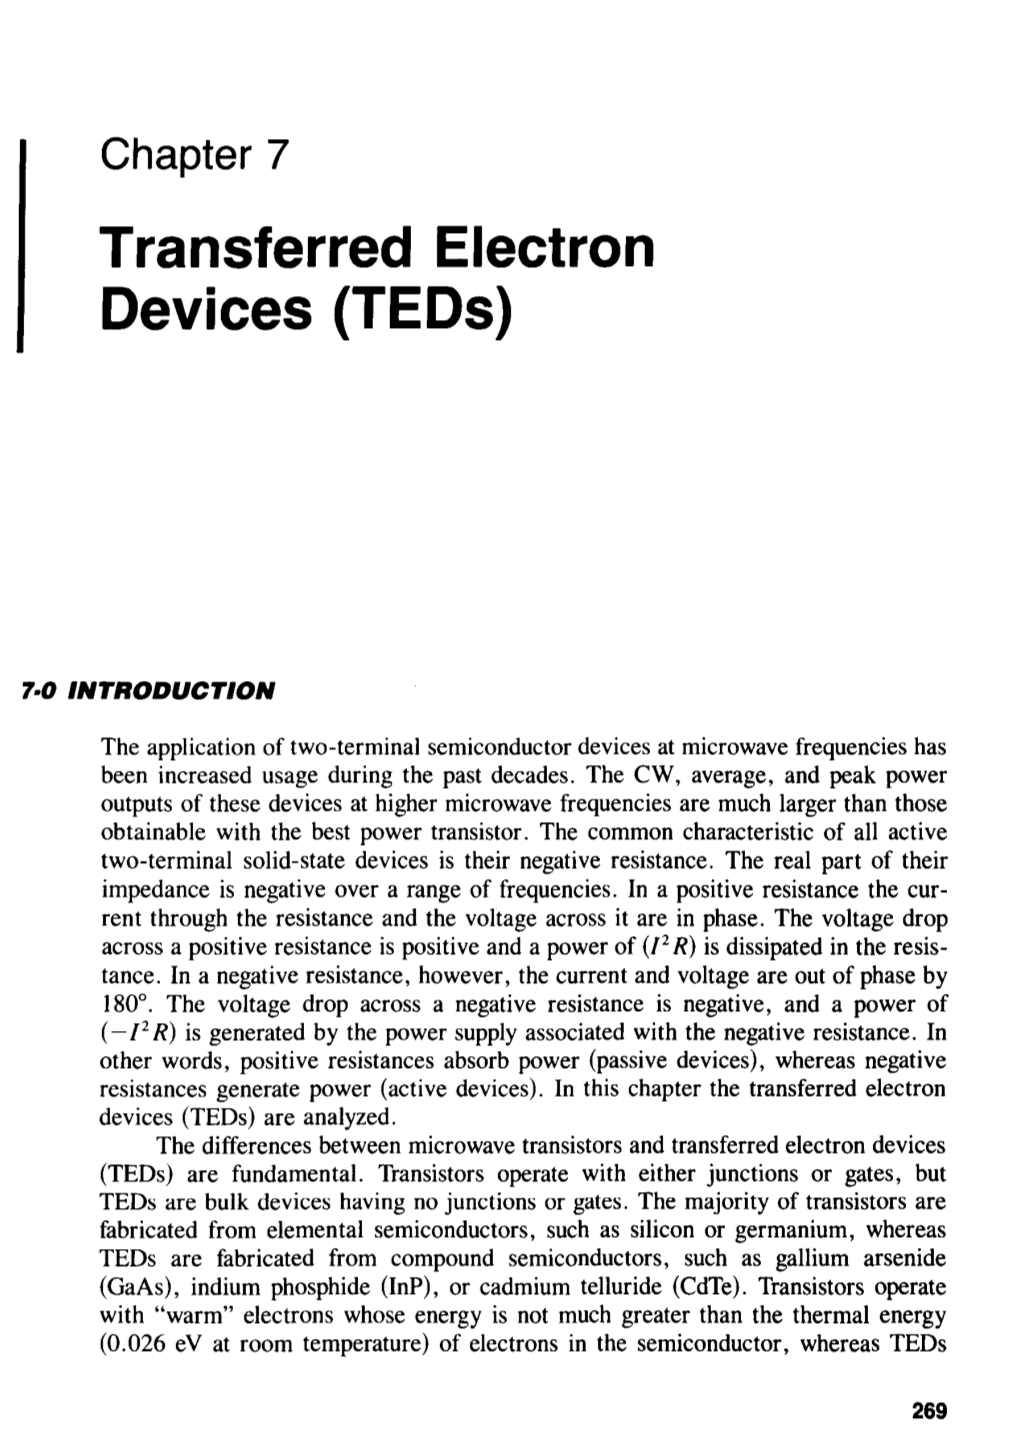 Chapter 7 Transferred Electron Devices (Teds)